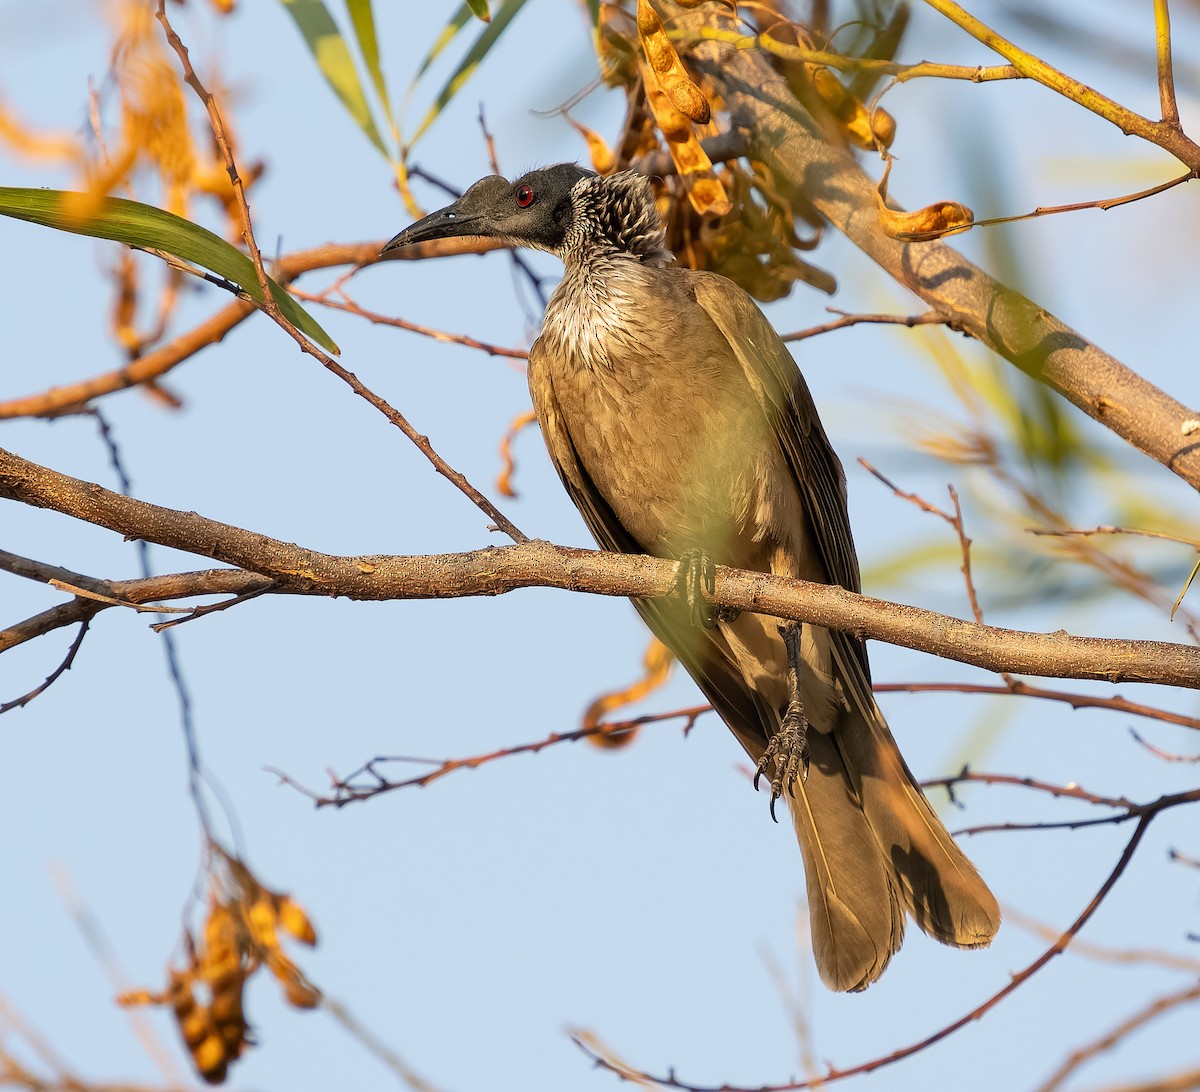 Silver-crowned Friarbird - Simon Colenutt